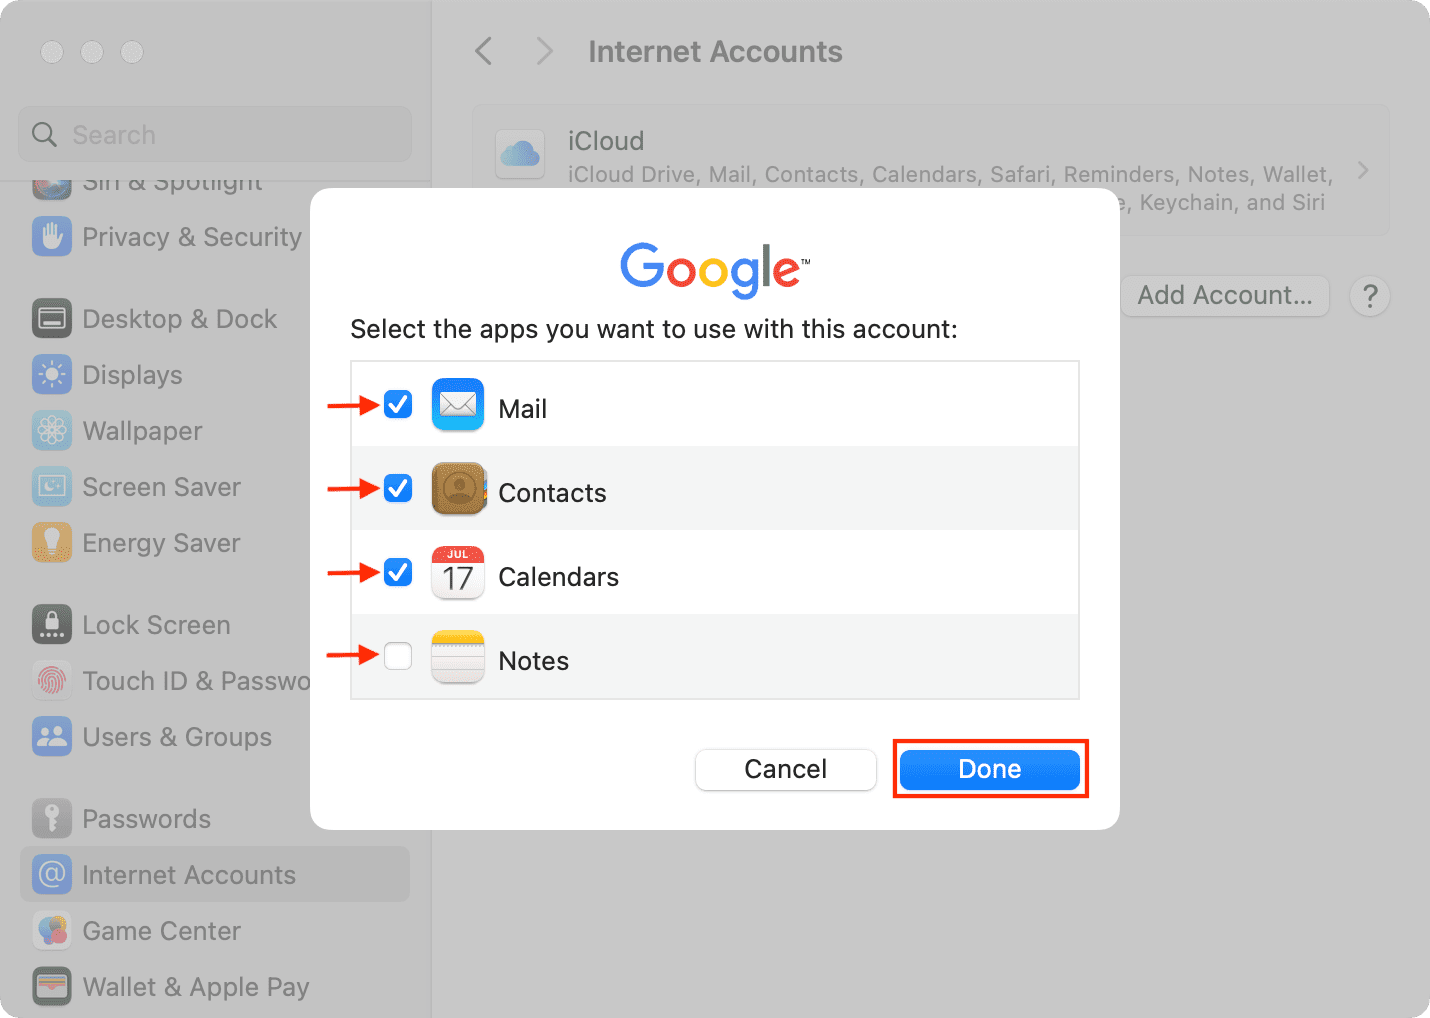 Select the apps you want to use with Google account on Mac